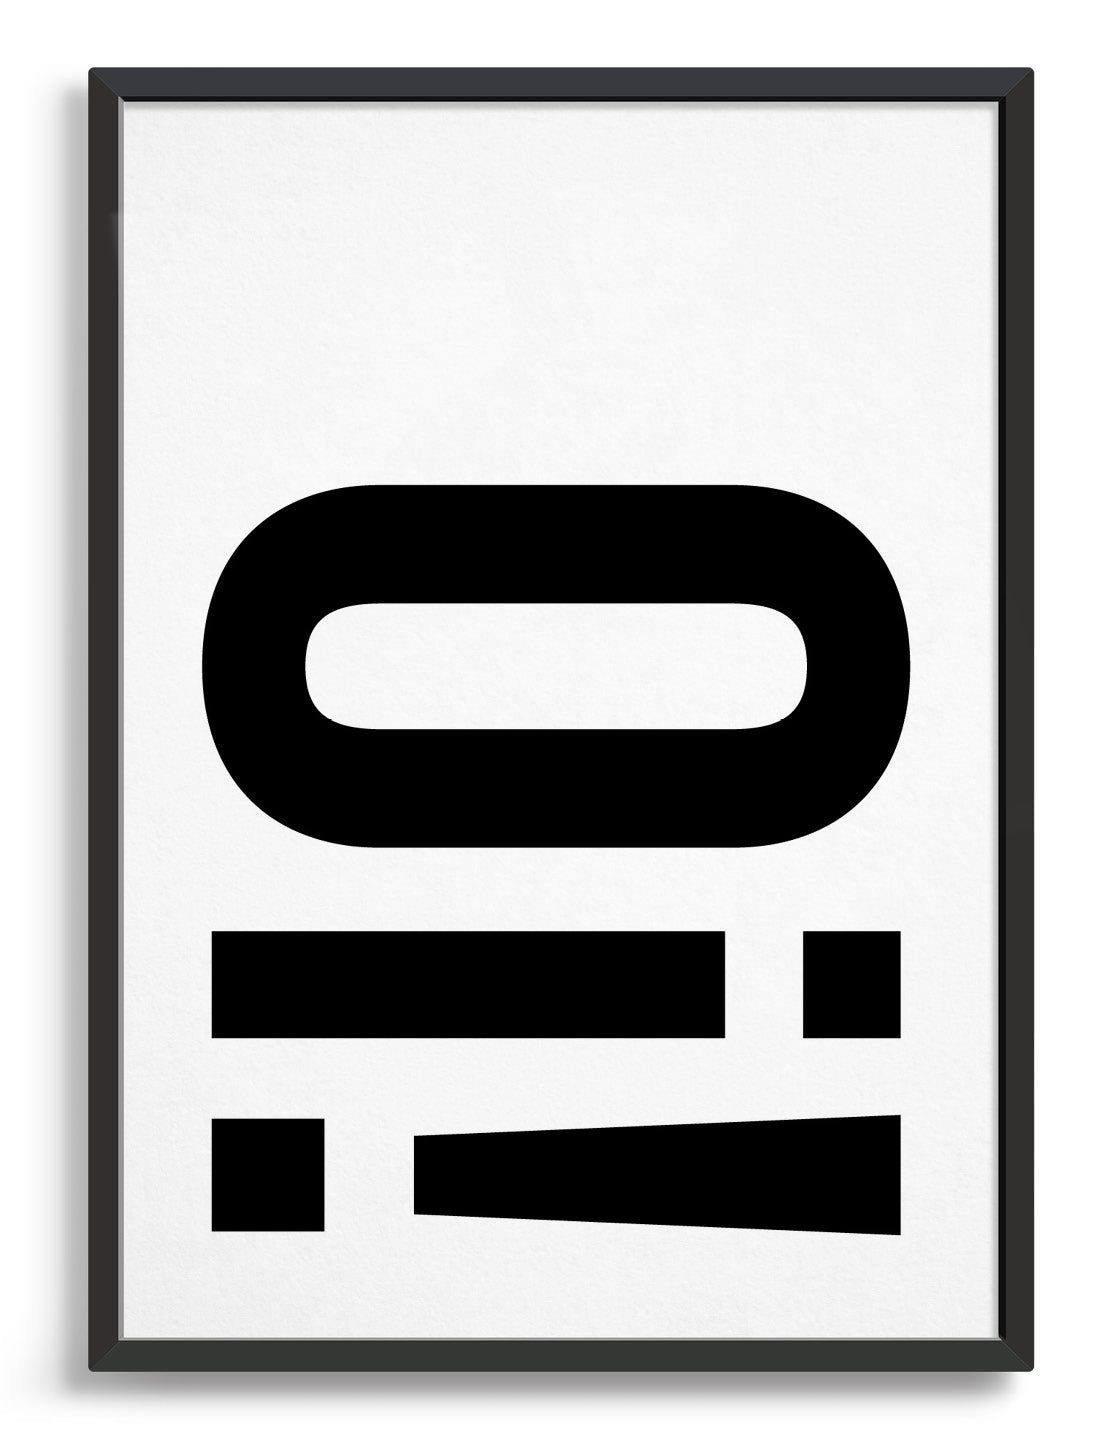 typography art print with Oi! in black against a white background